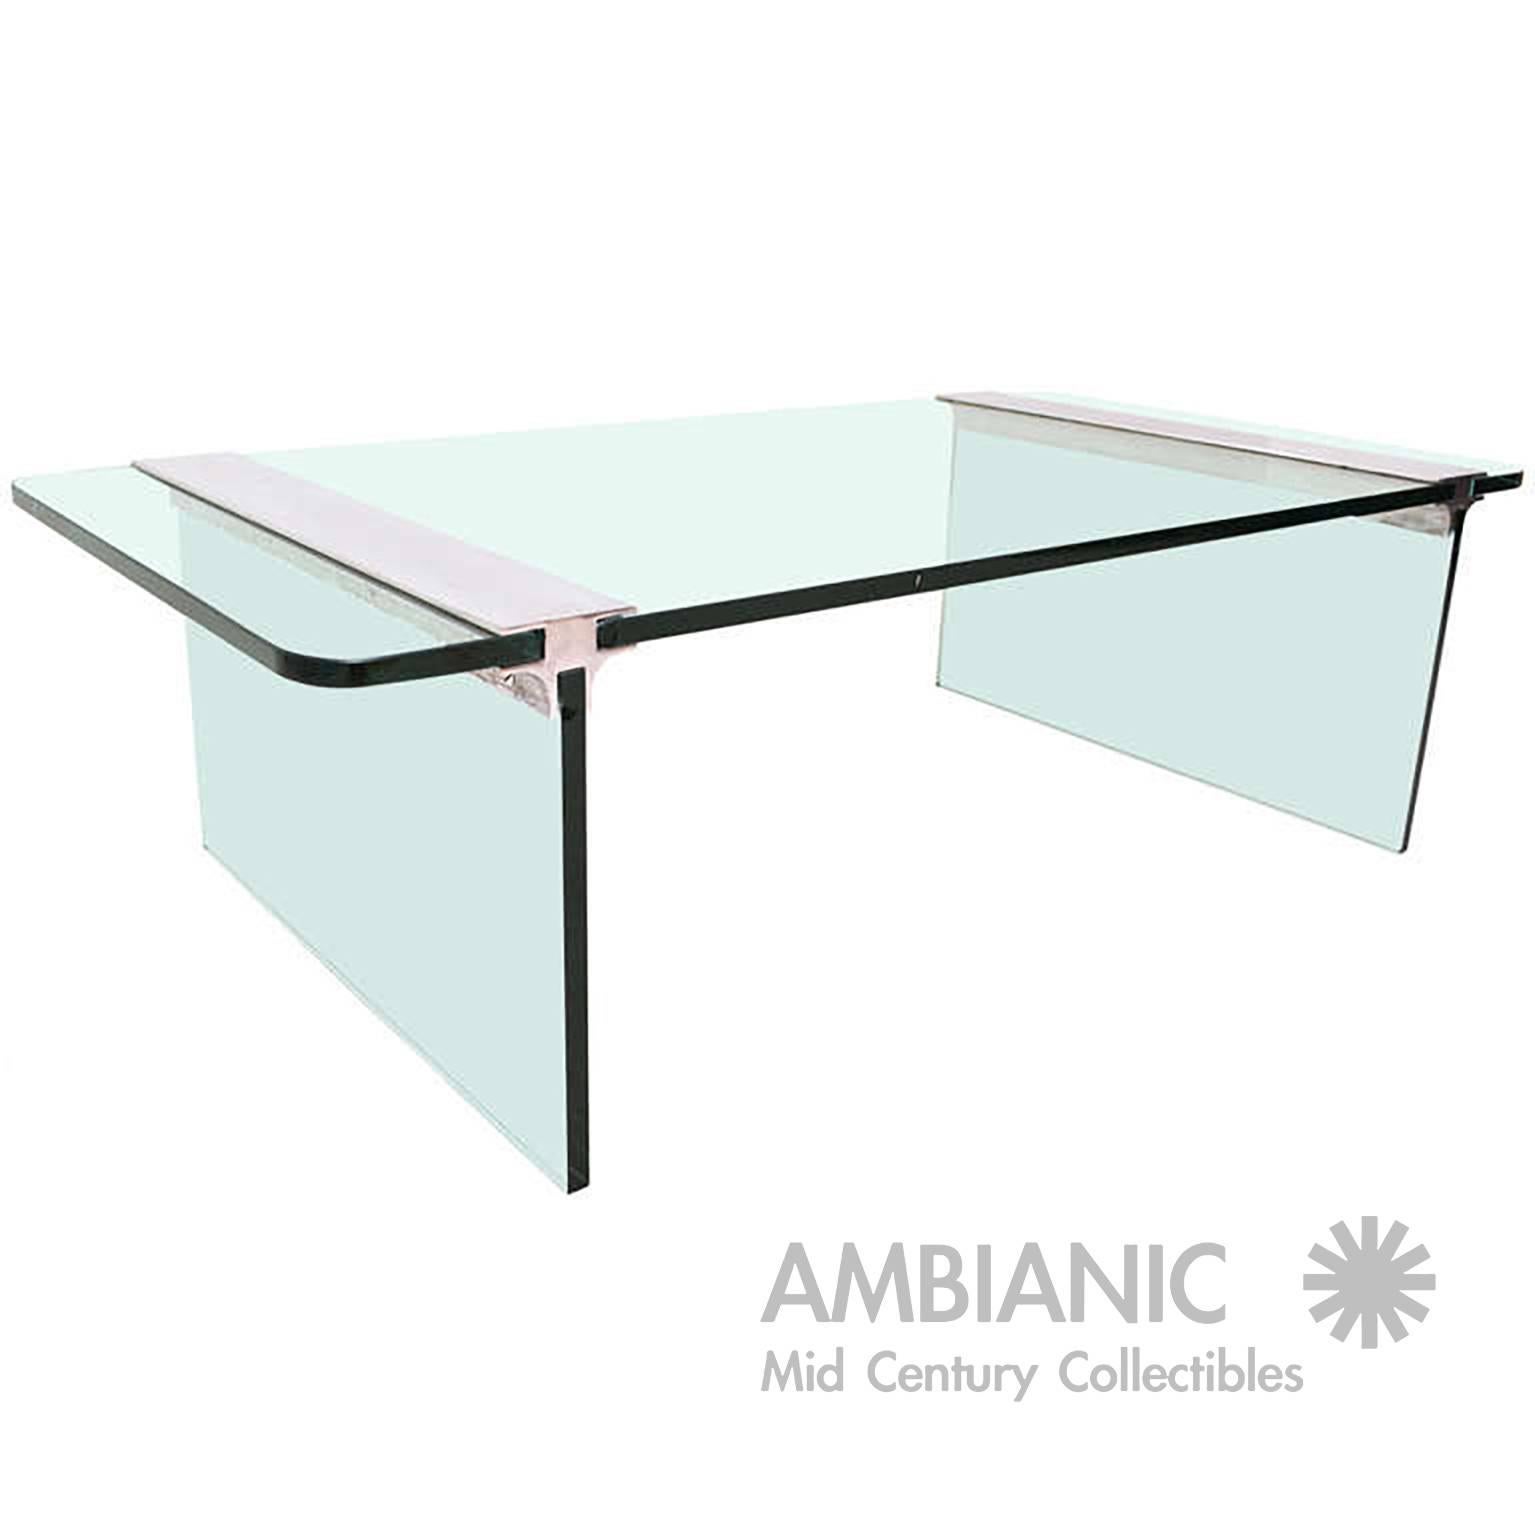 American Pace Coffee Table, Glass and Aluminum